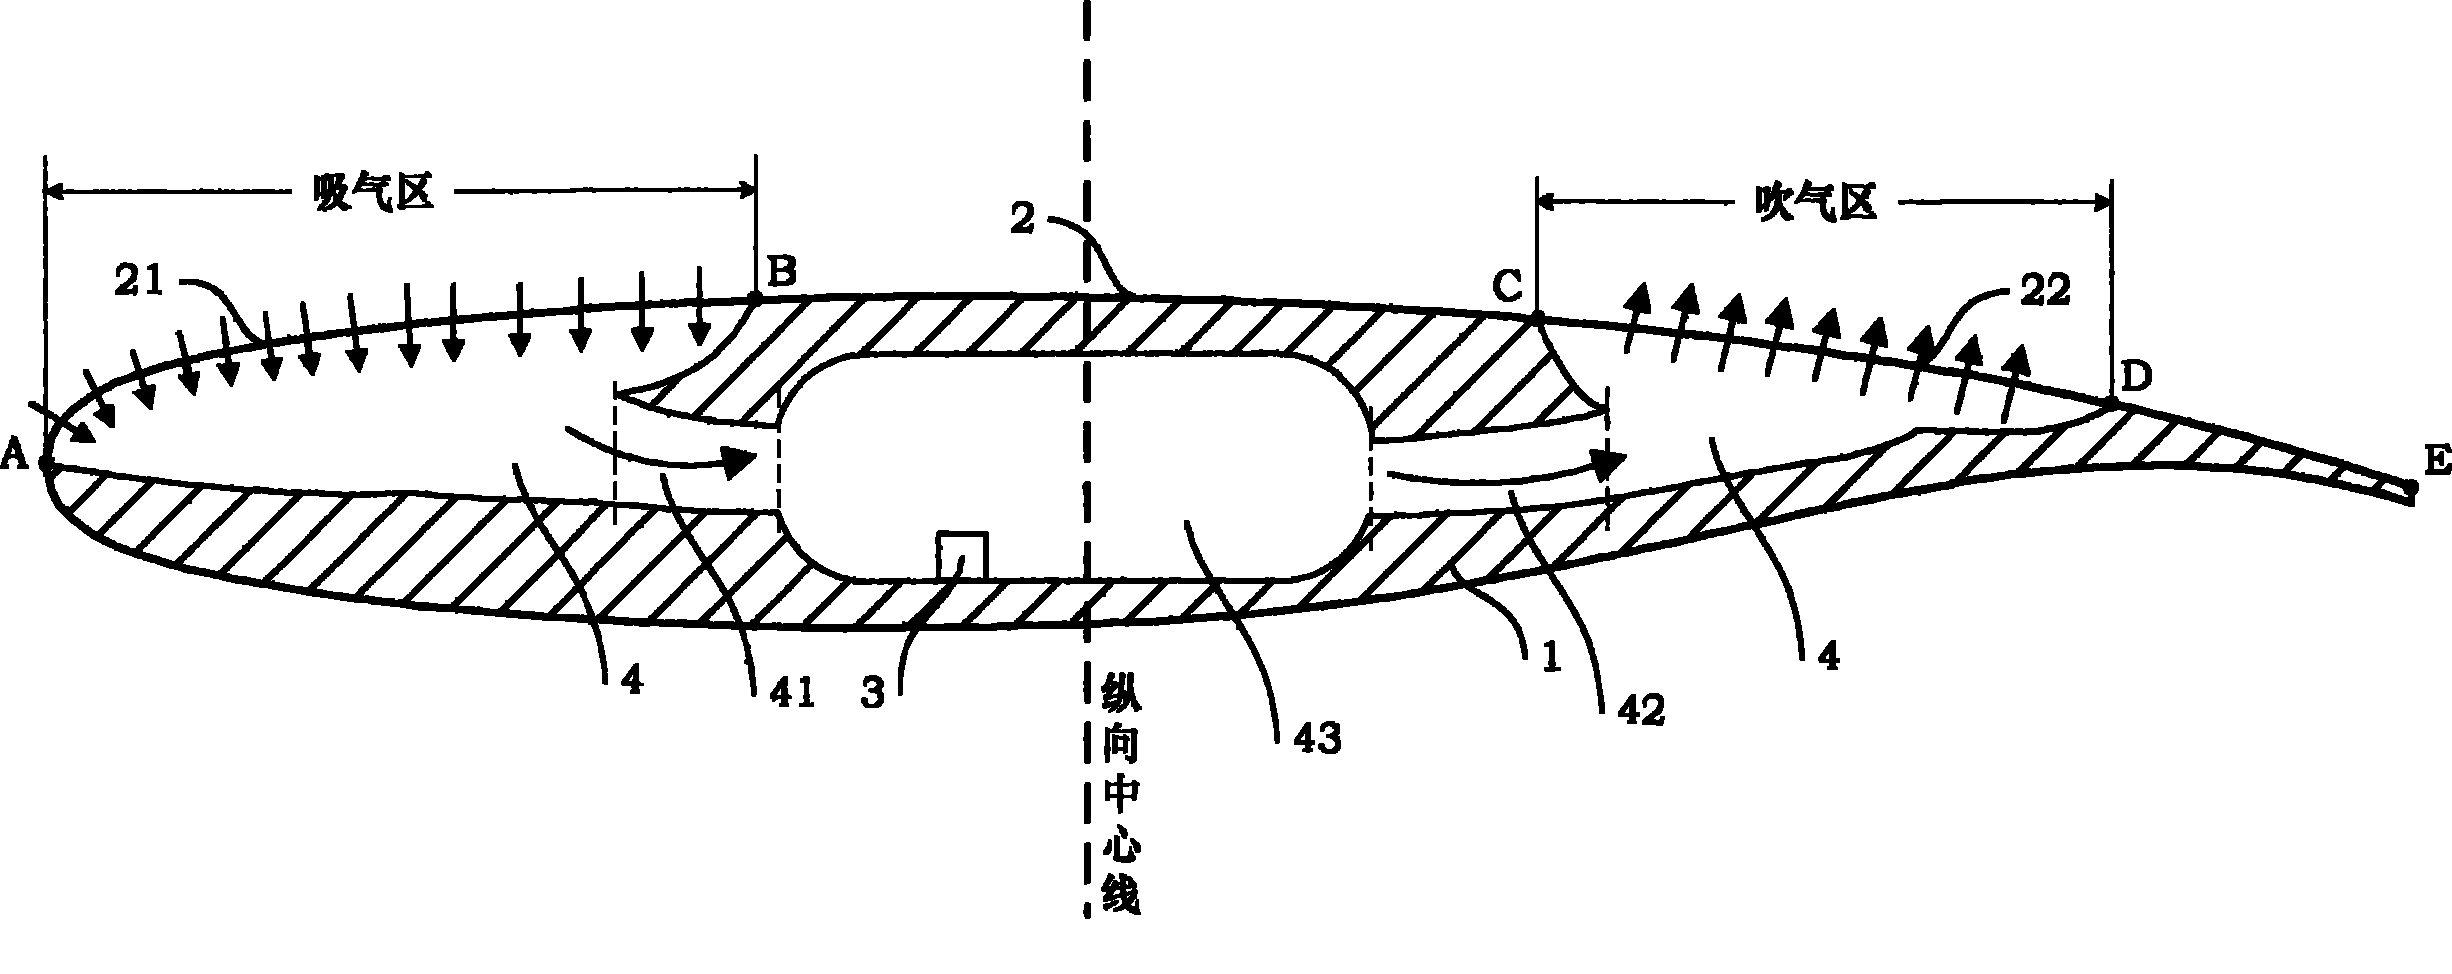 Wing structure having lamellar flow flowing control and separation control